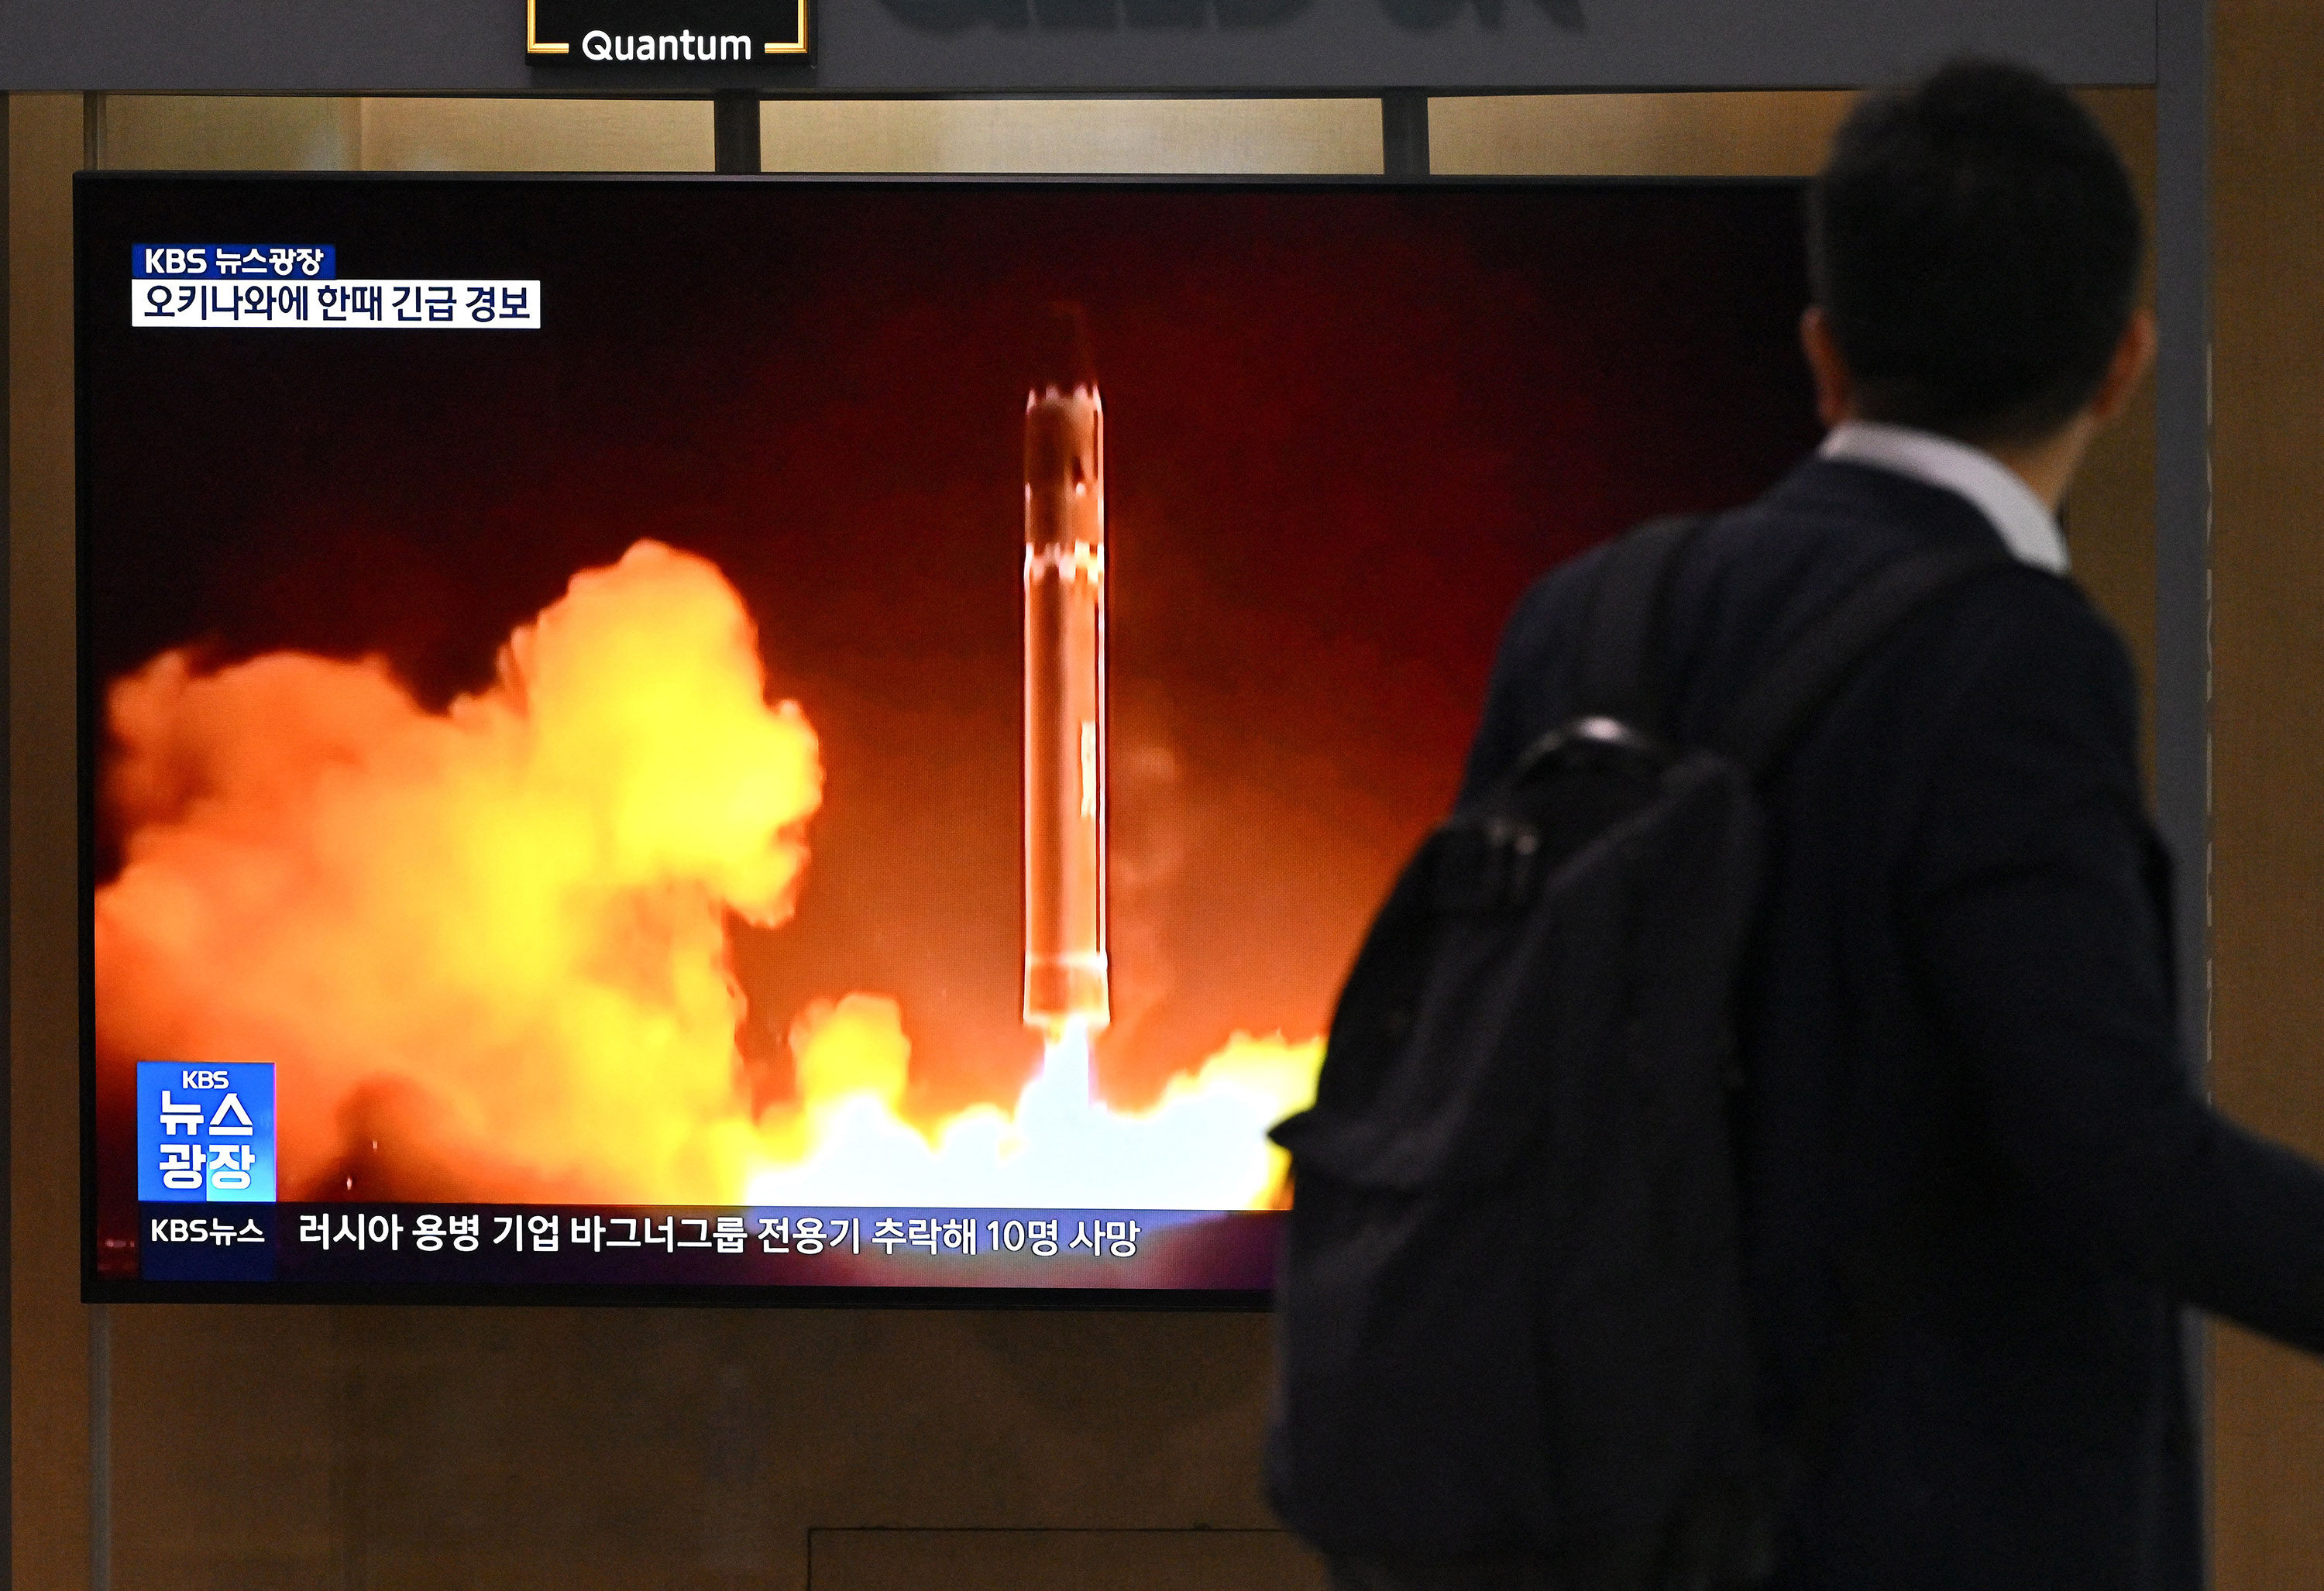 A man walks past a television screen showing a news broadcast with file footage of a North Korean missile test, at a railway station in Seoul on Thursday. Photo: AFP